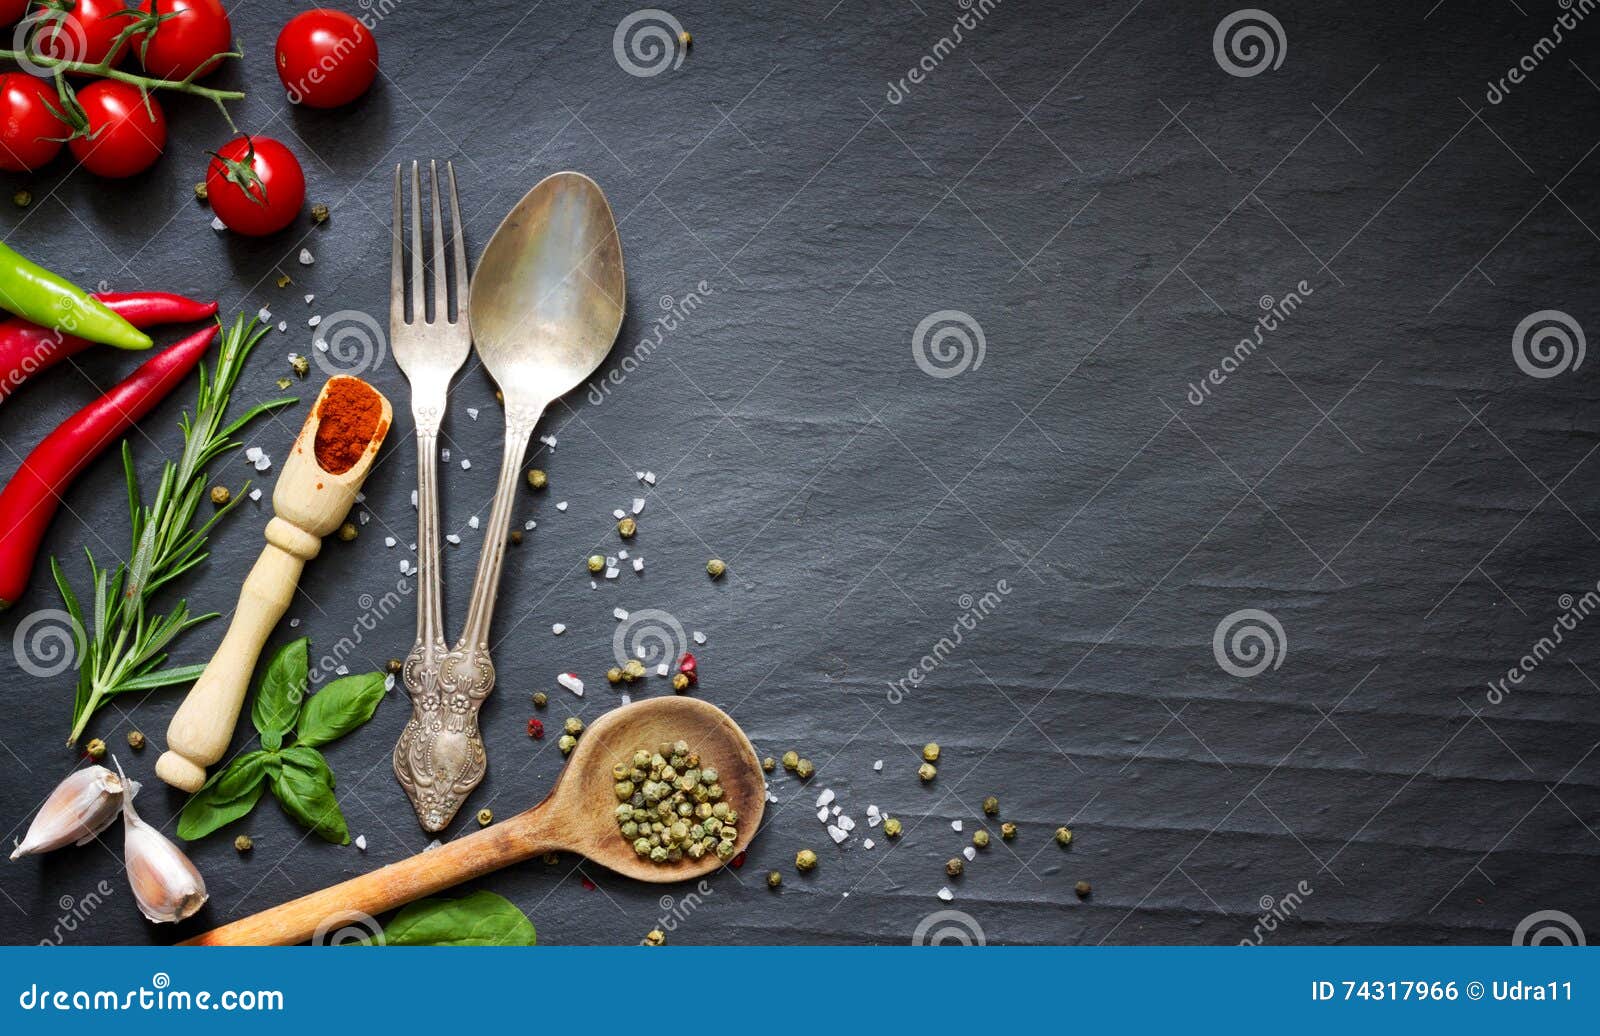 Menu Food Culinary Frame Concept on Black Background Stock Photo - Image of  concept, culinary: 74317966